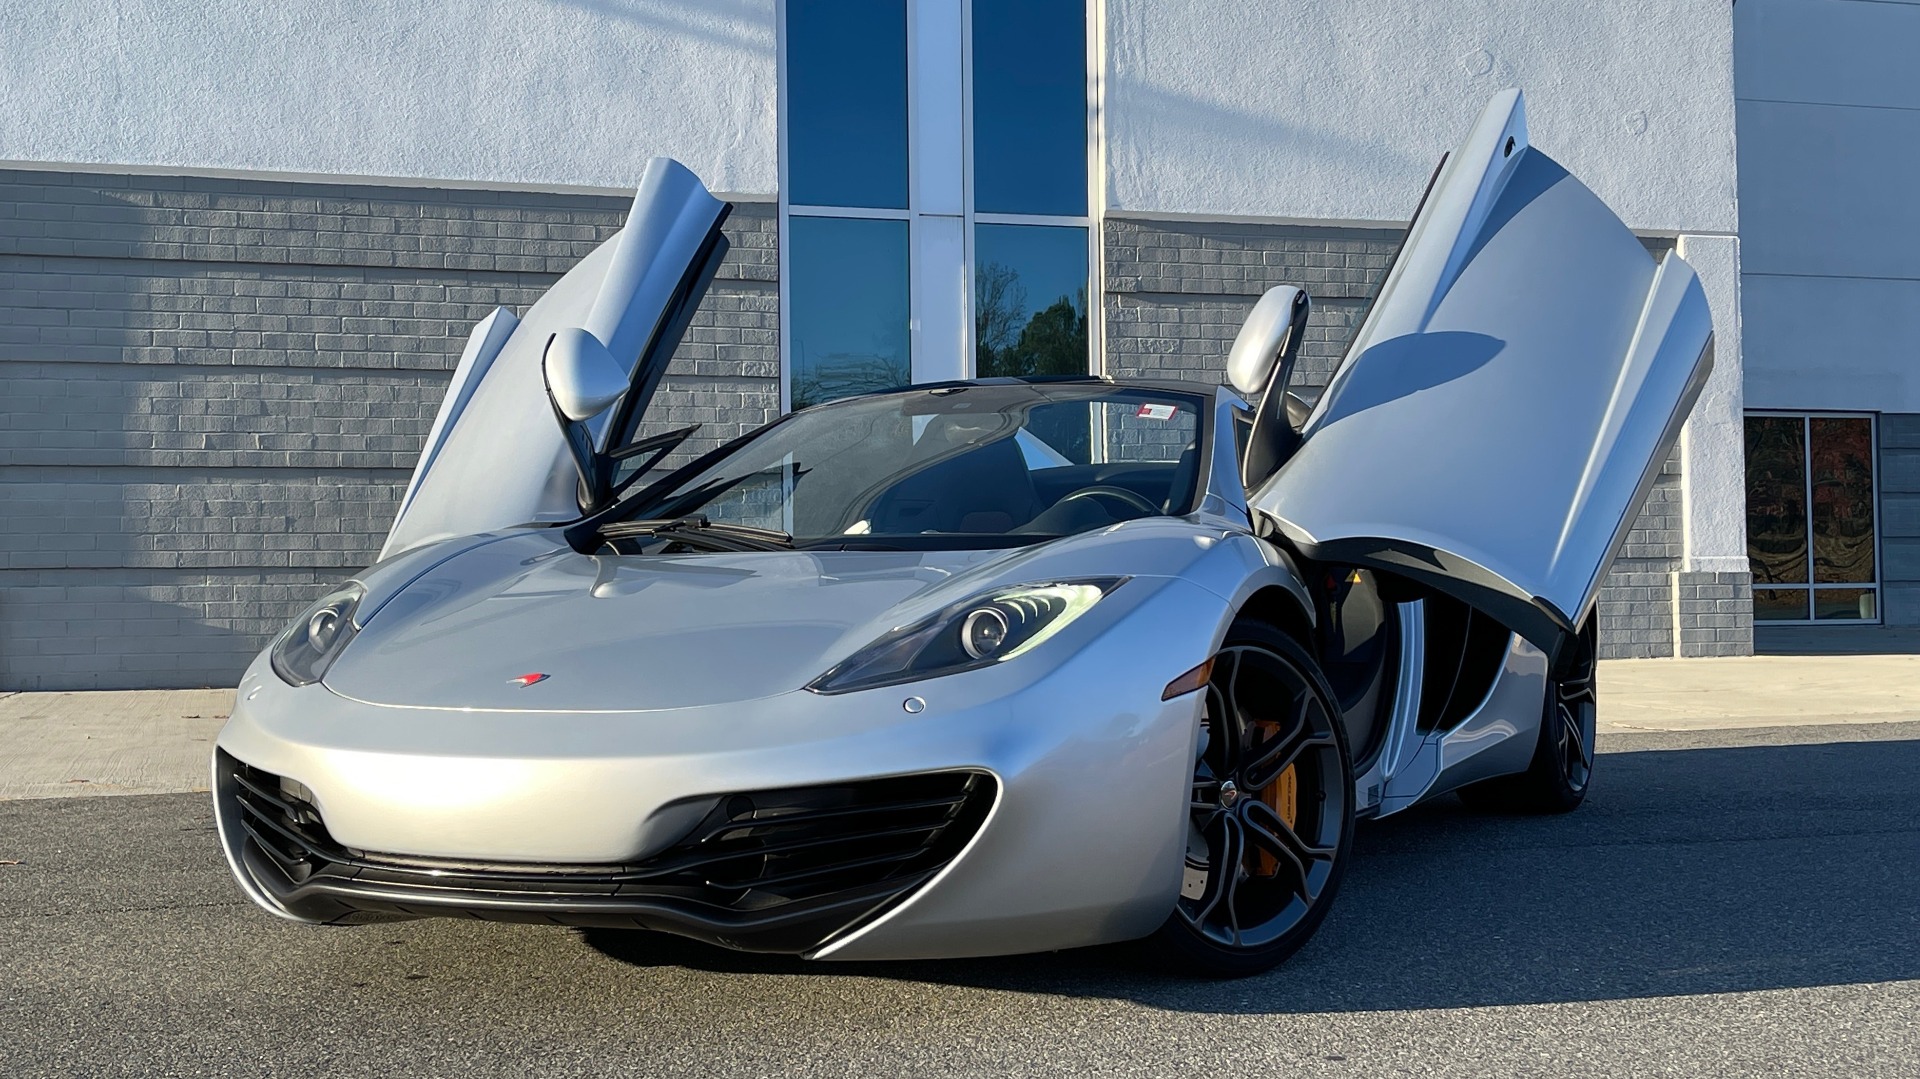 Used 2013 McLaren MP4 12C SPIDER 3.8L TURBO V8 616HP / 7AM TRANS / NAV / MERIDIAN SND for sale $145,000 at Formula Imports in Charlotte NC 28227 8